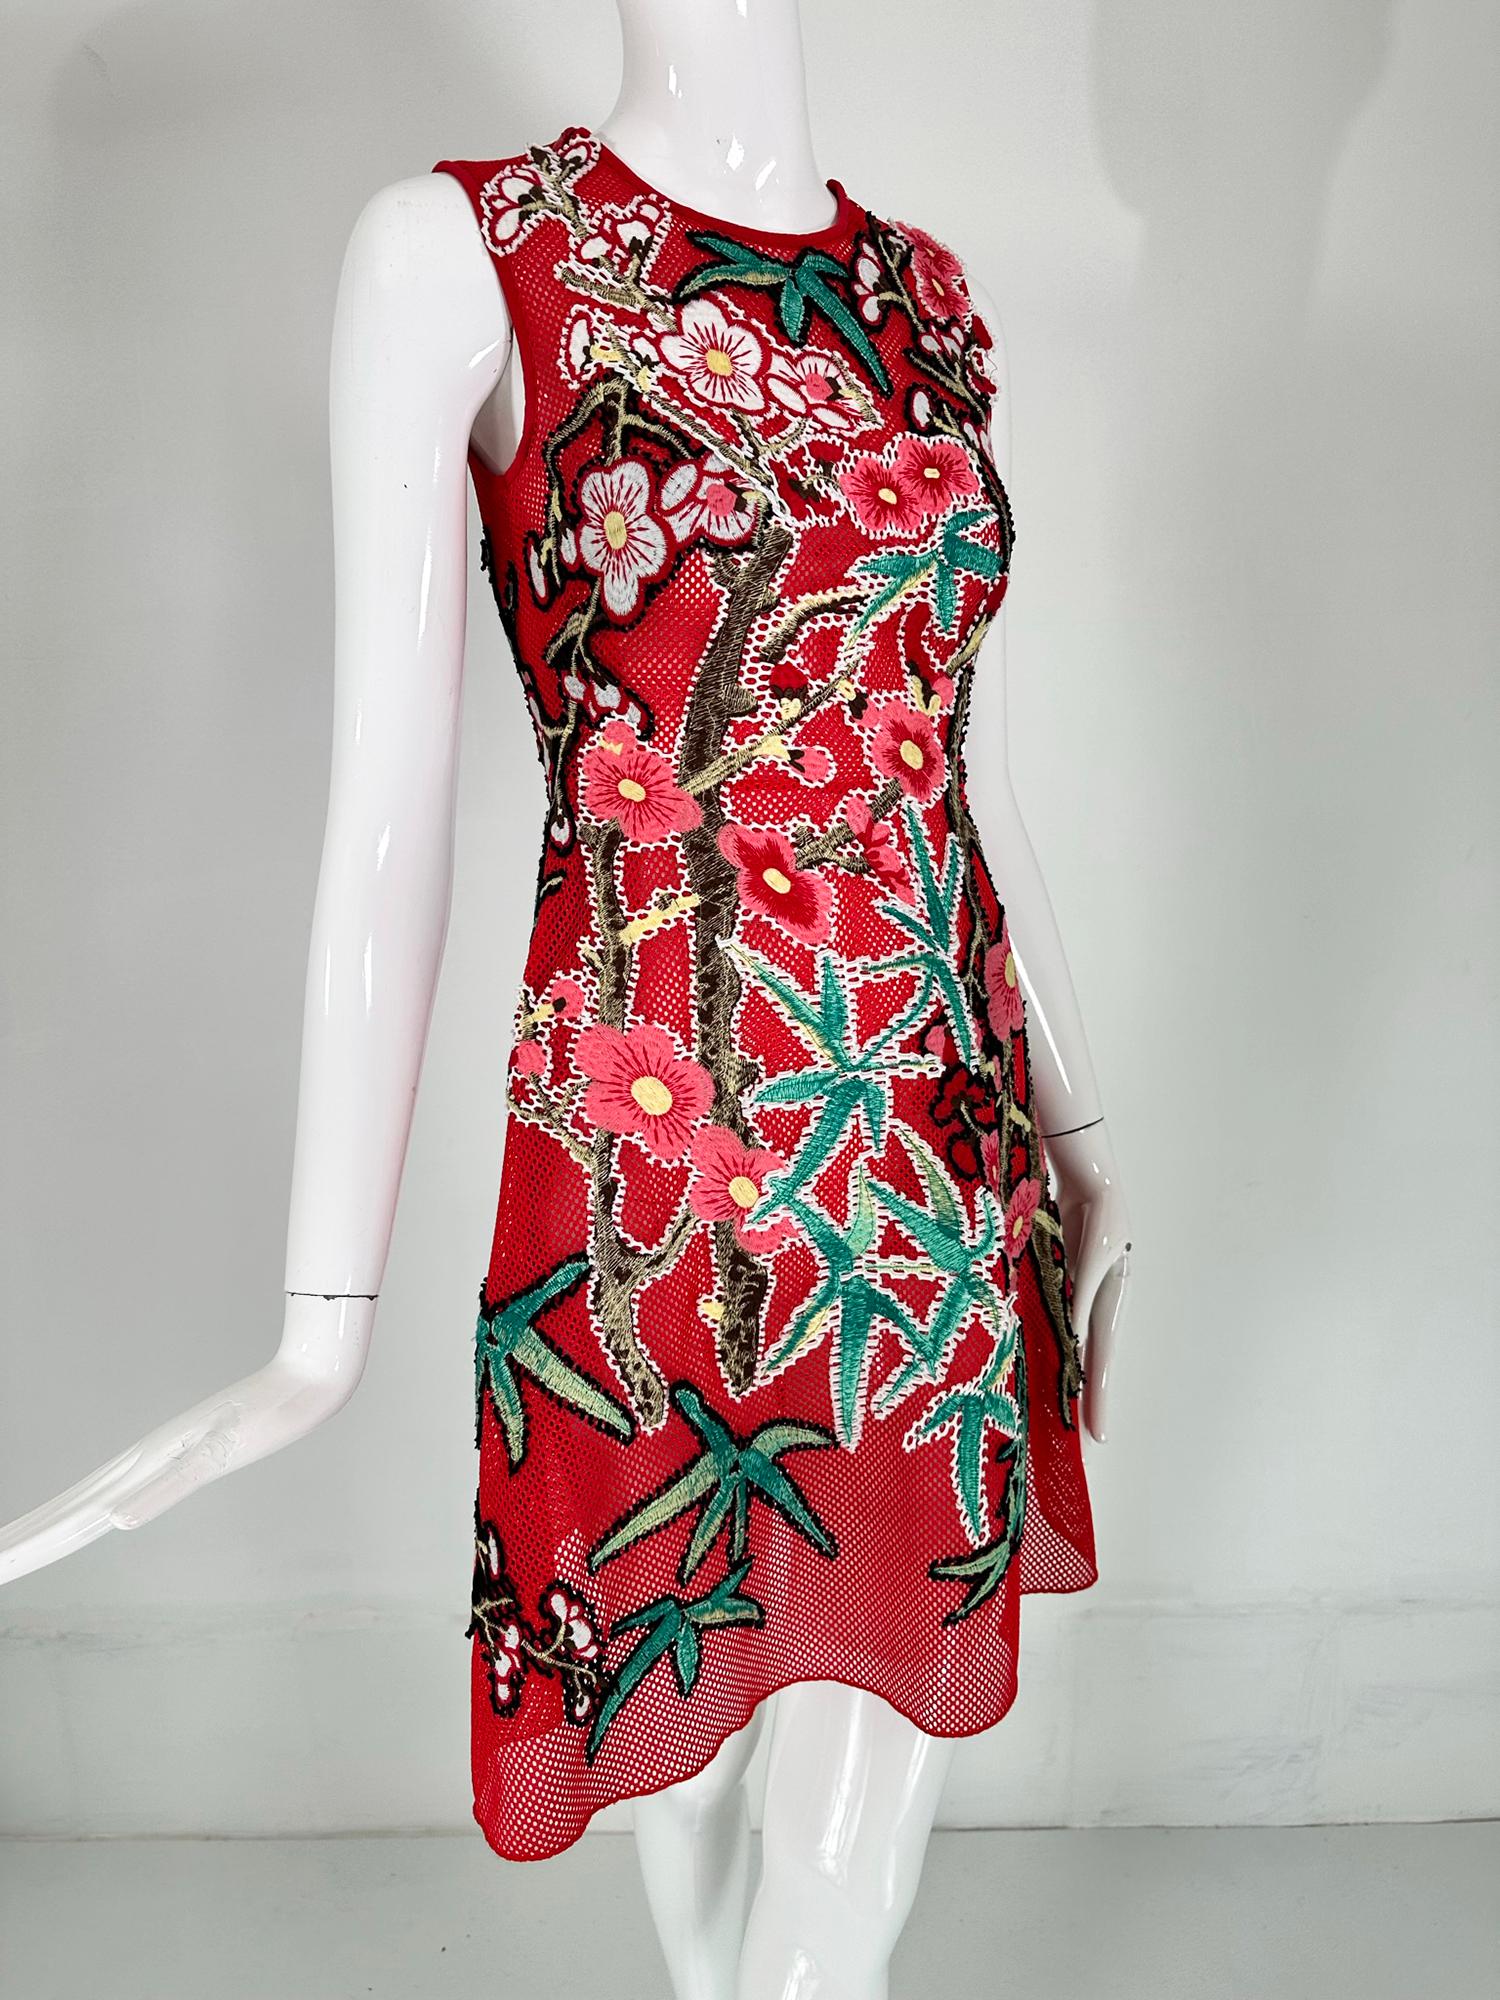 Vivienne Tam Abstract Applique Red Mesh Dress XS In Good Condition For Sale In West Palm Beach, FL